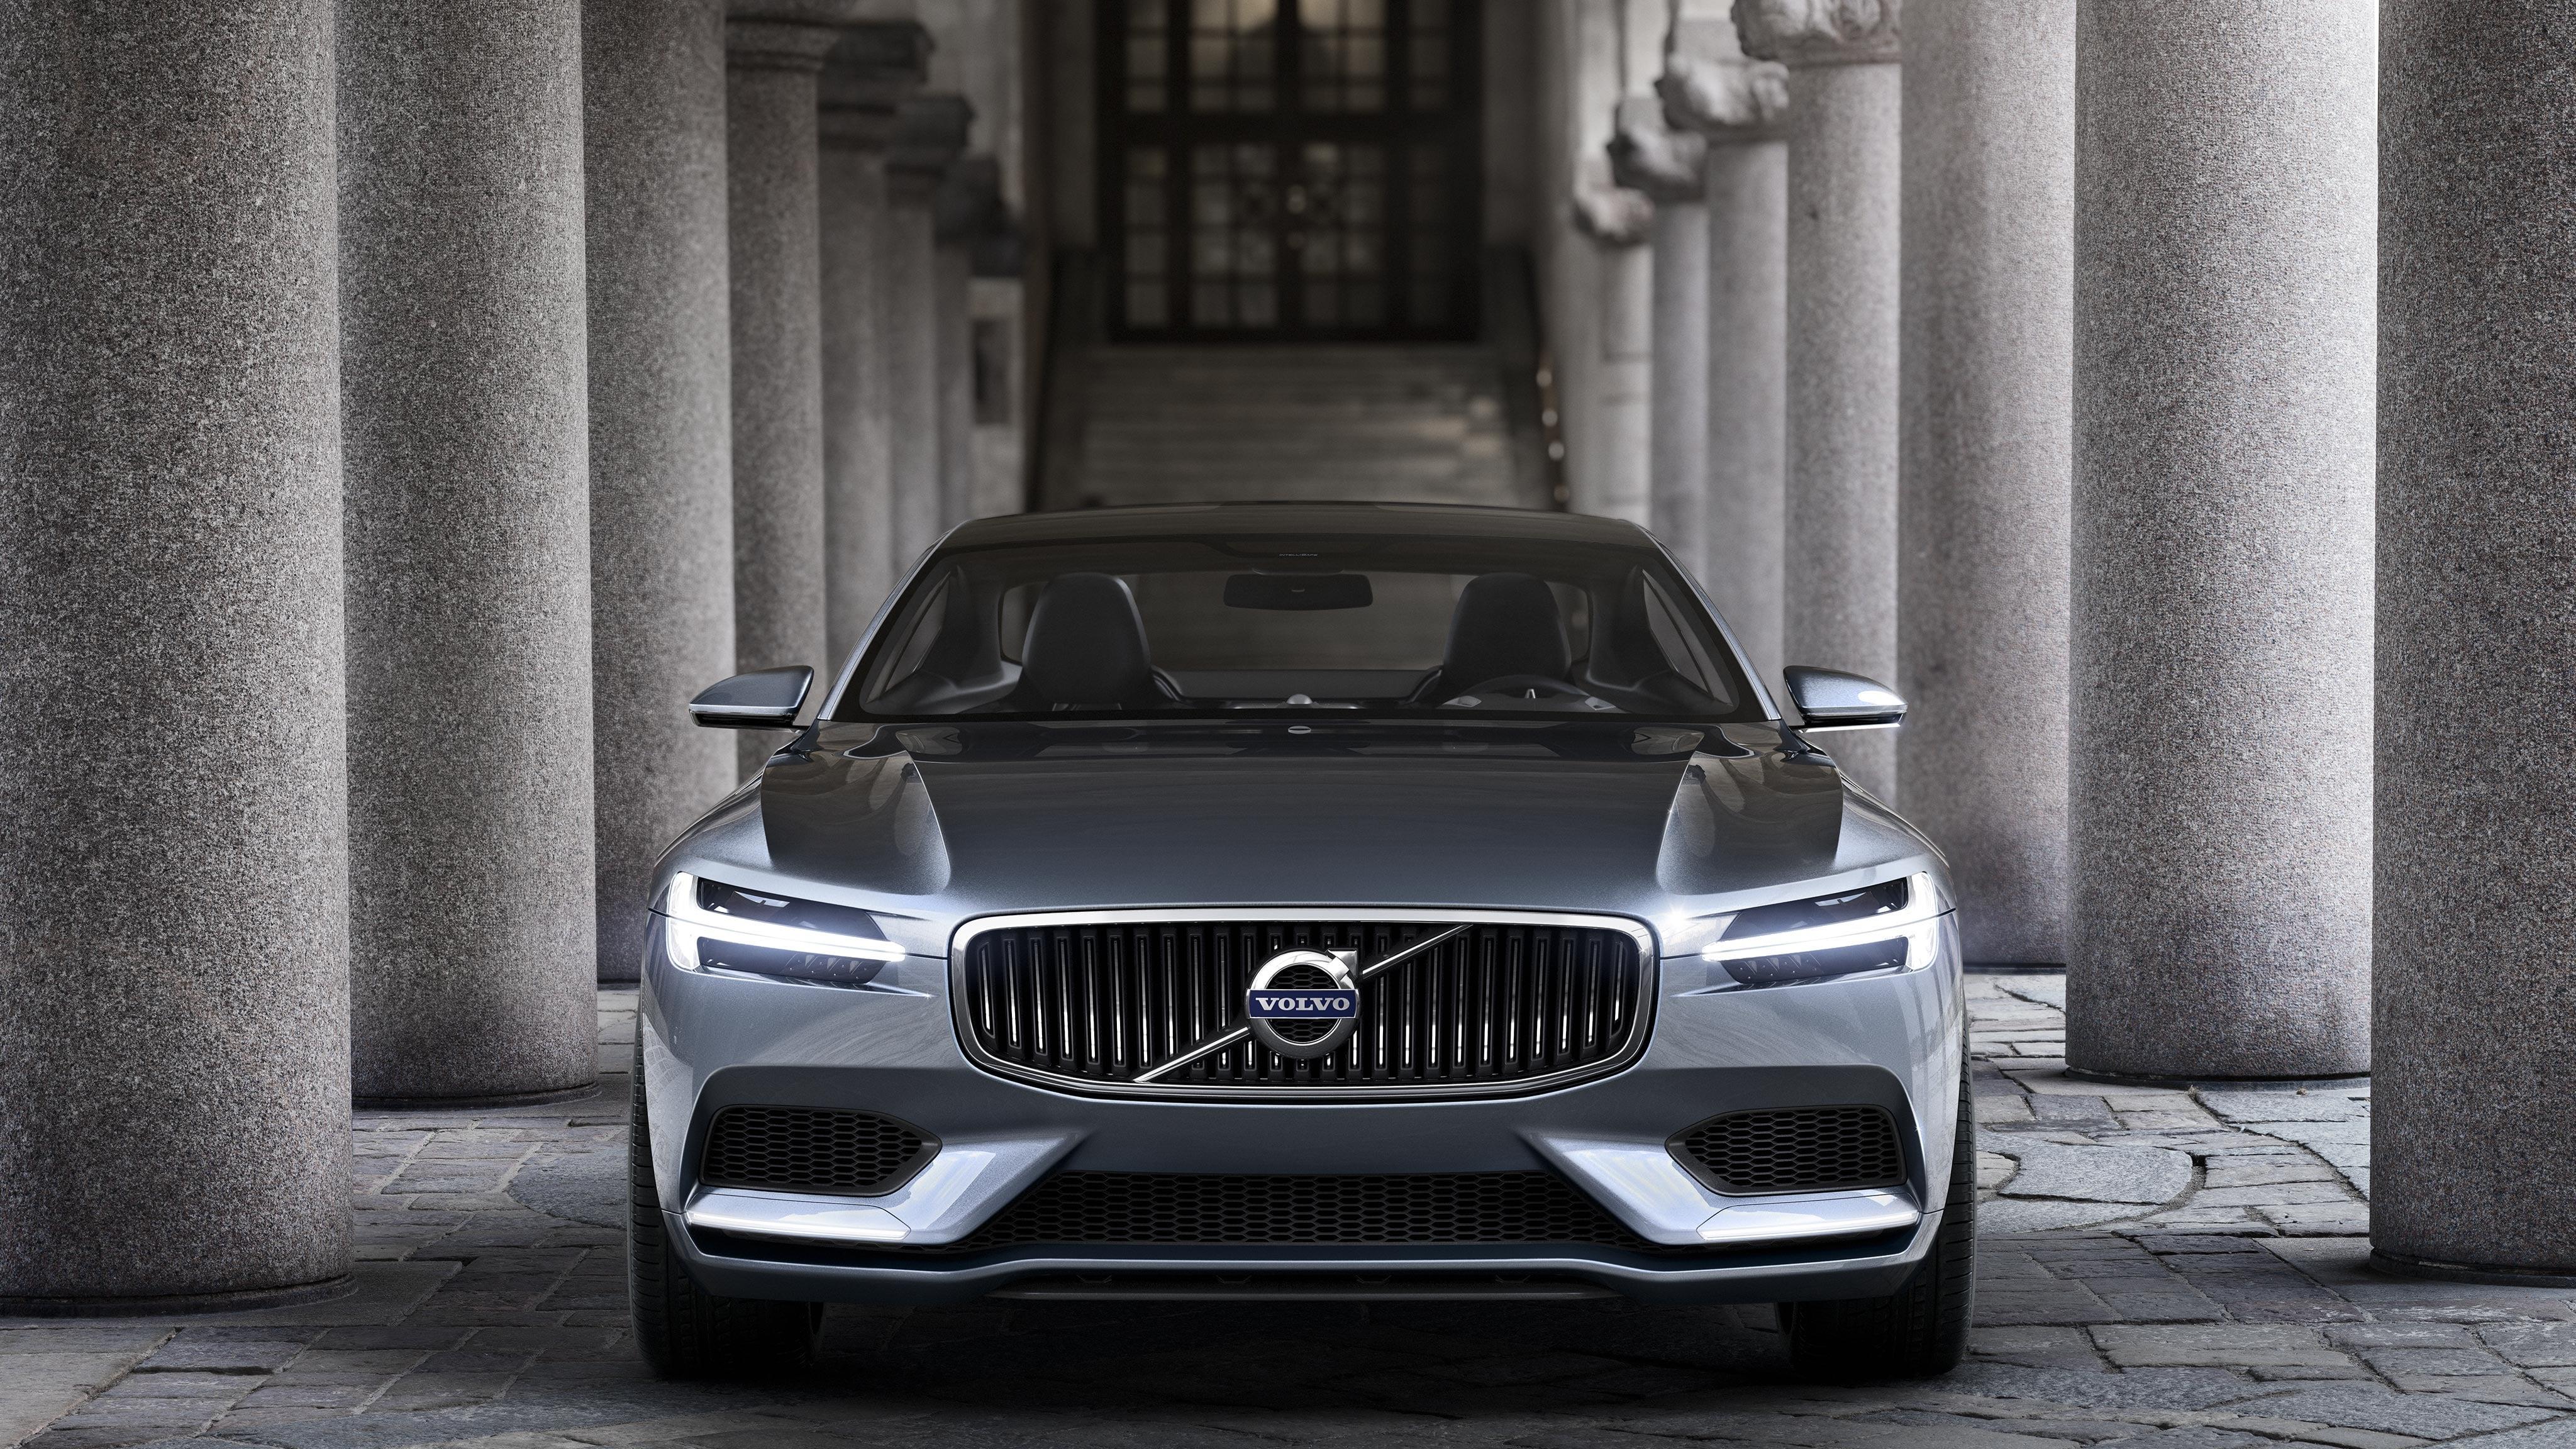 Volvo Hd Wallpaper For Phone